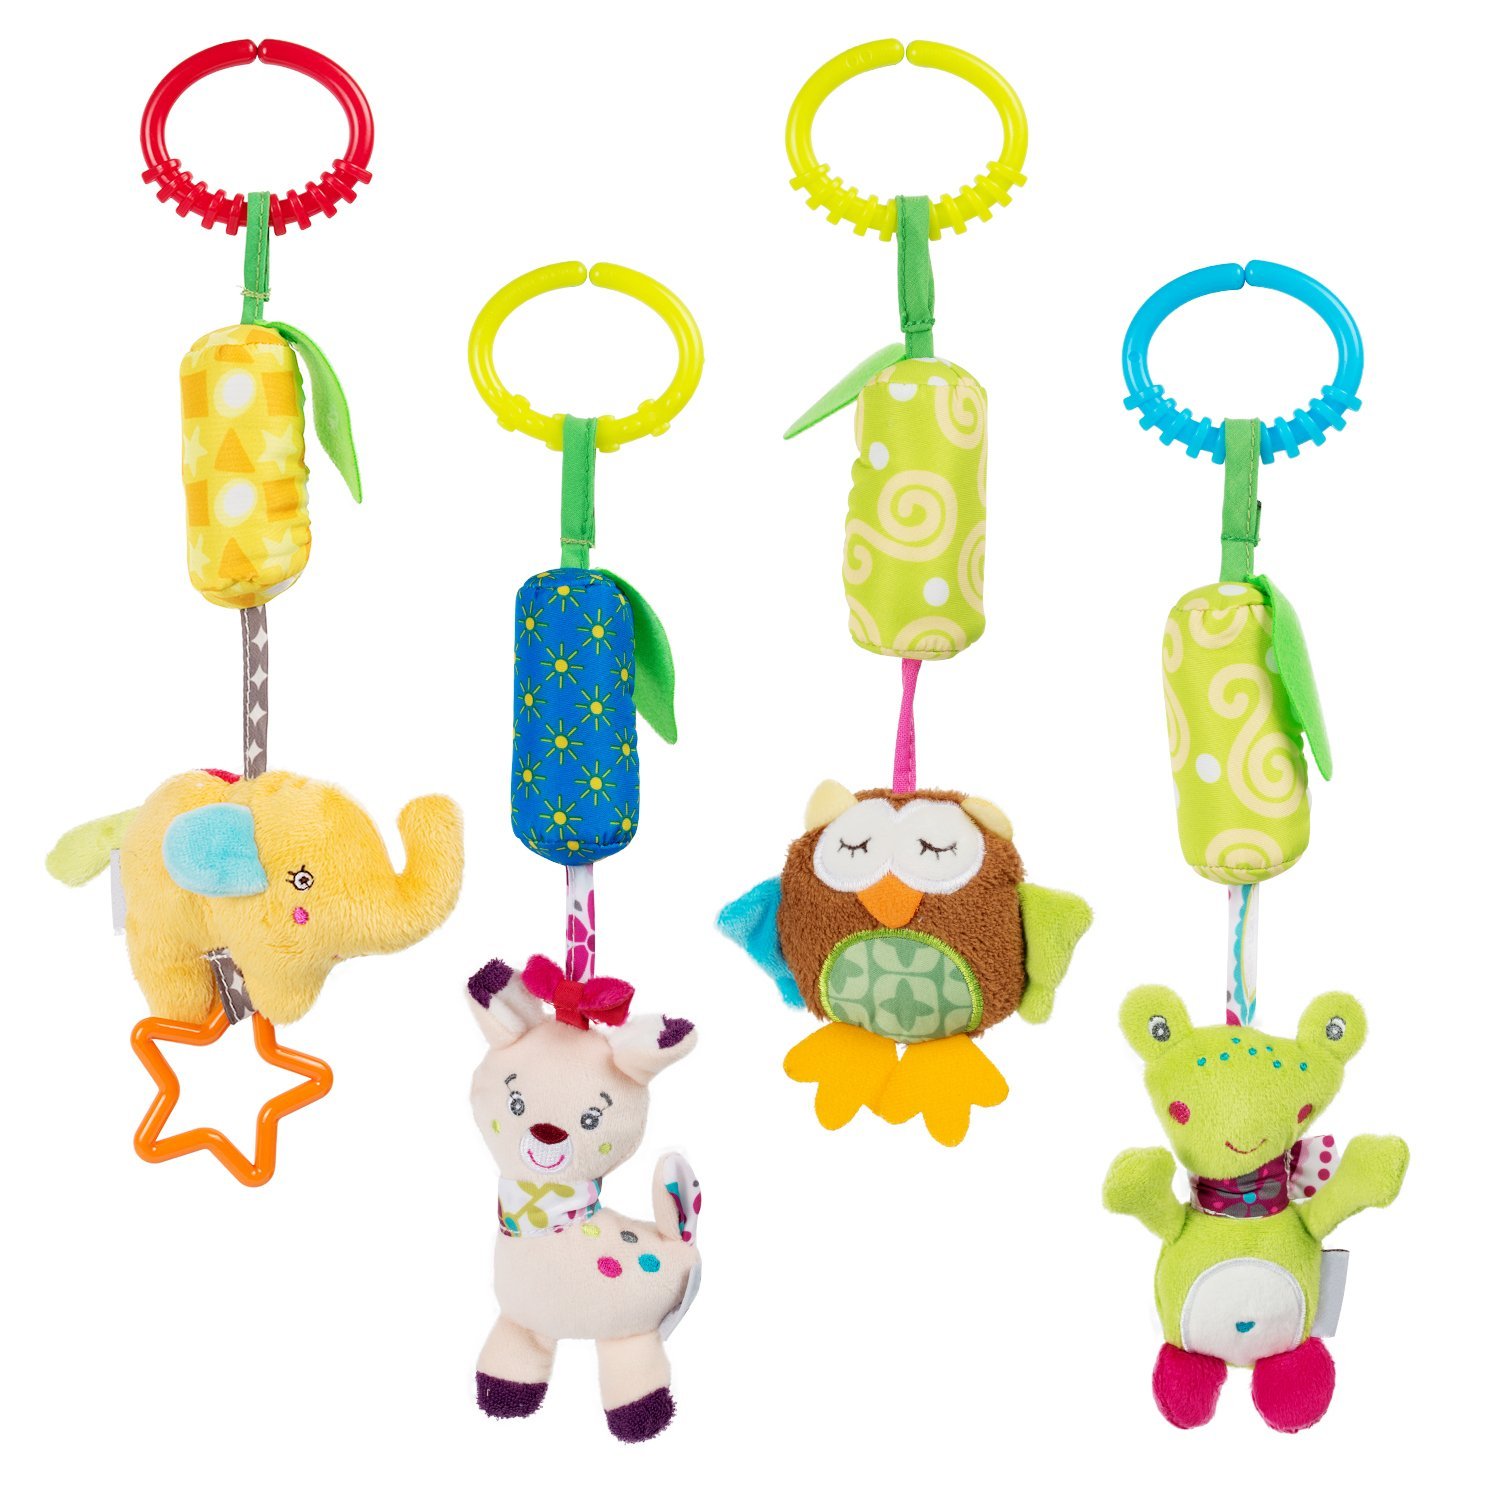 Amazon.com : Tumama Baby Rattle Toys Stroller Hanging Bell Puppet ...